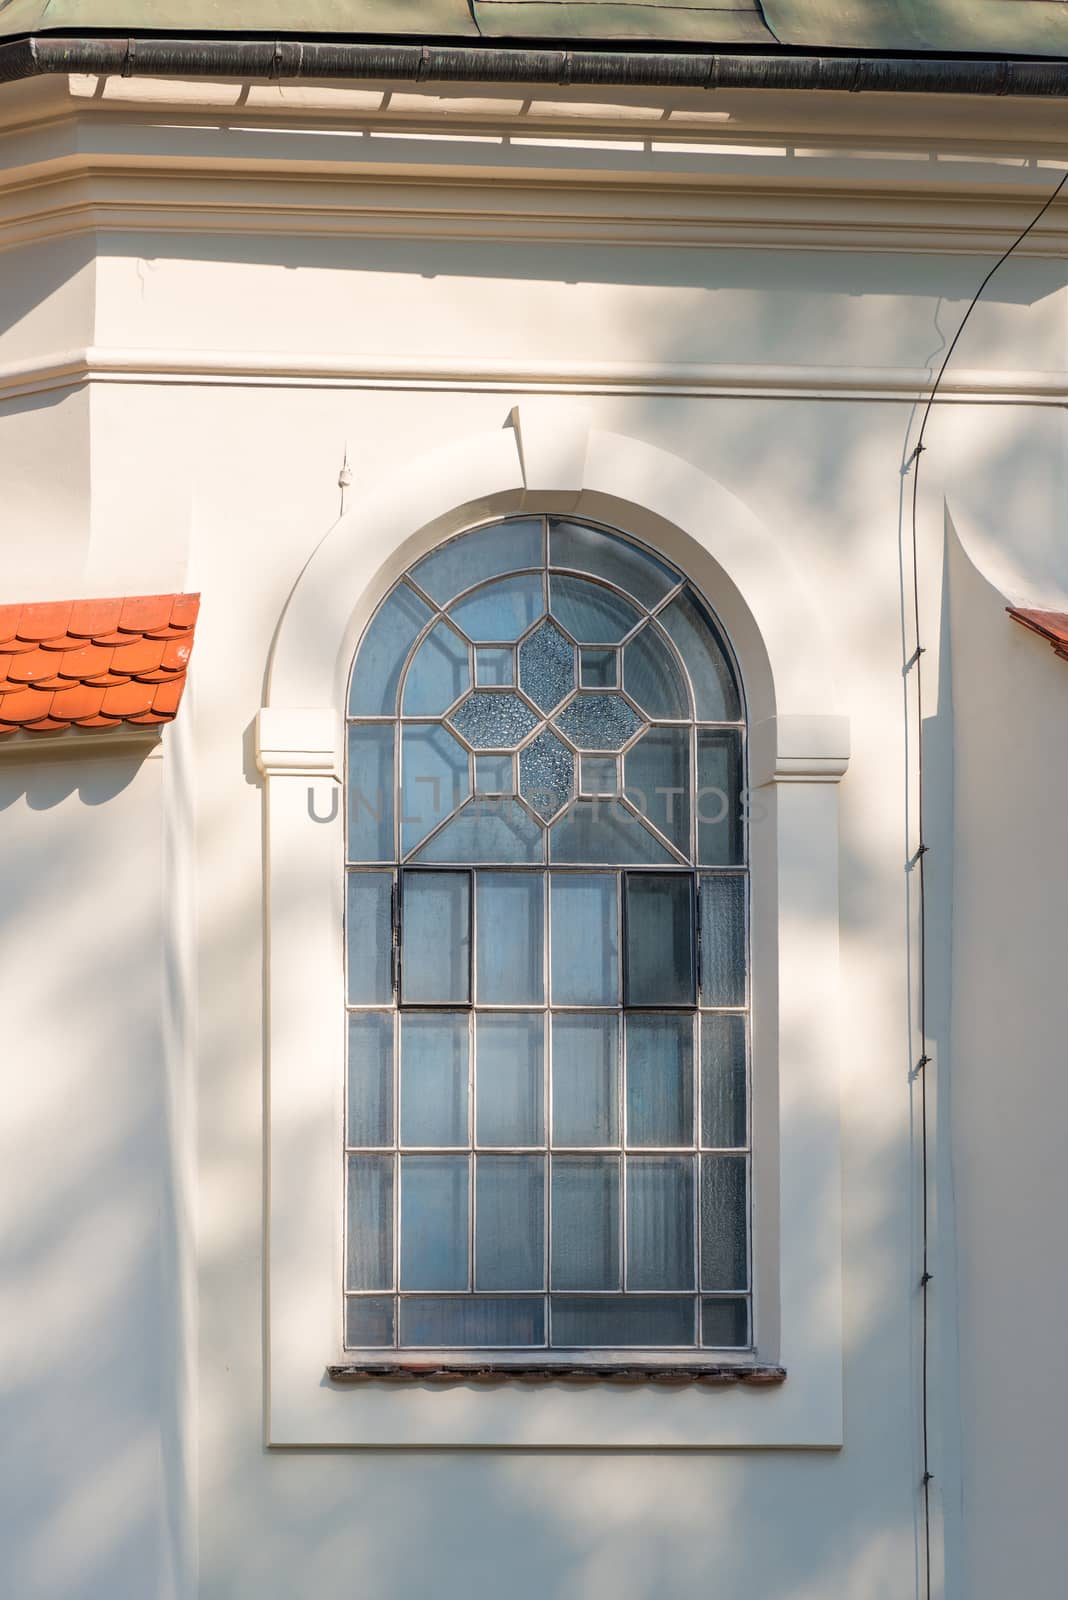 a window with an arch and a lattice, a white wall of a building